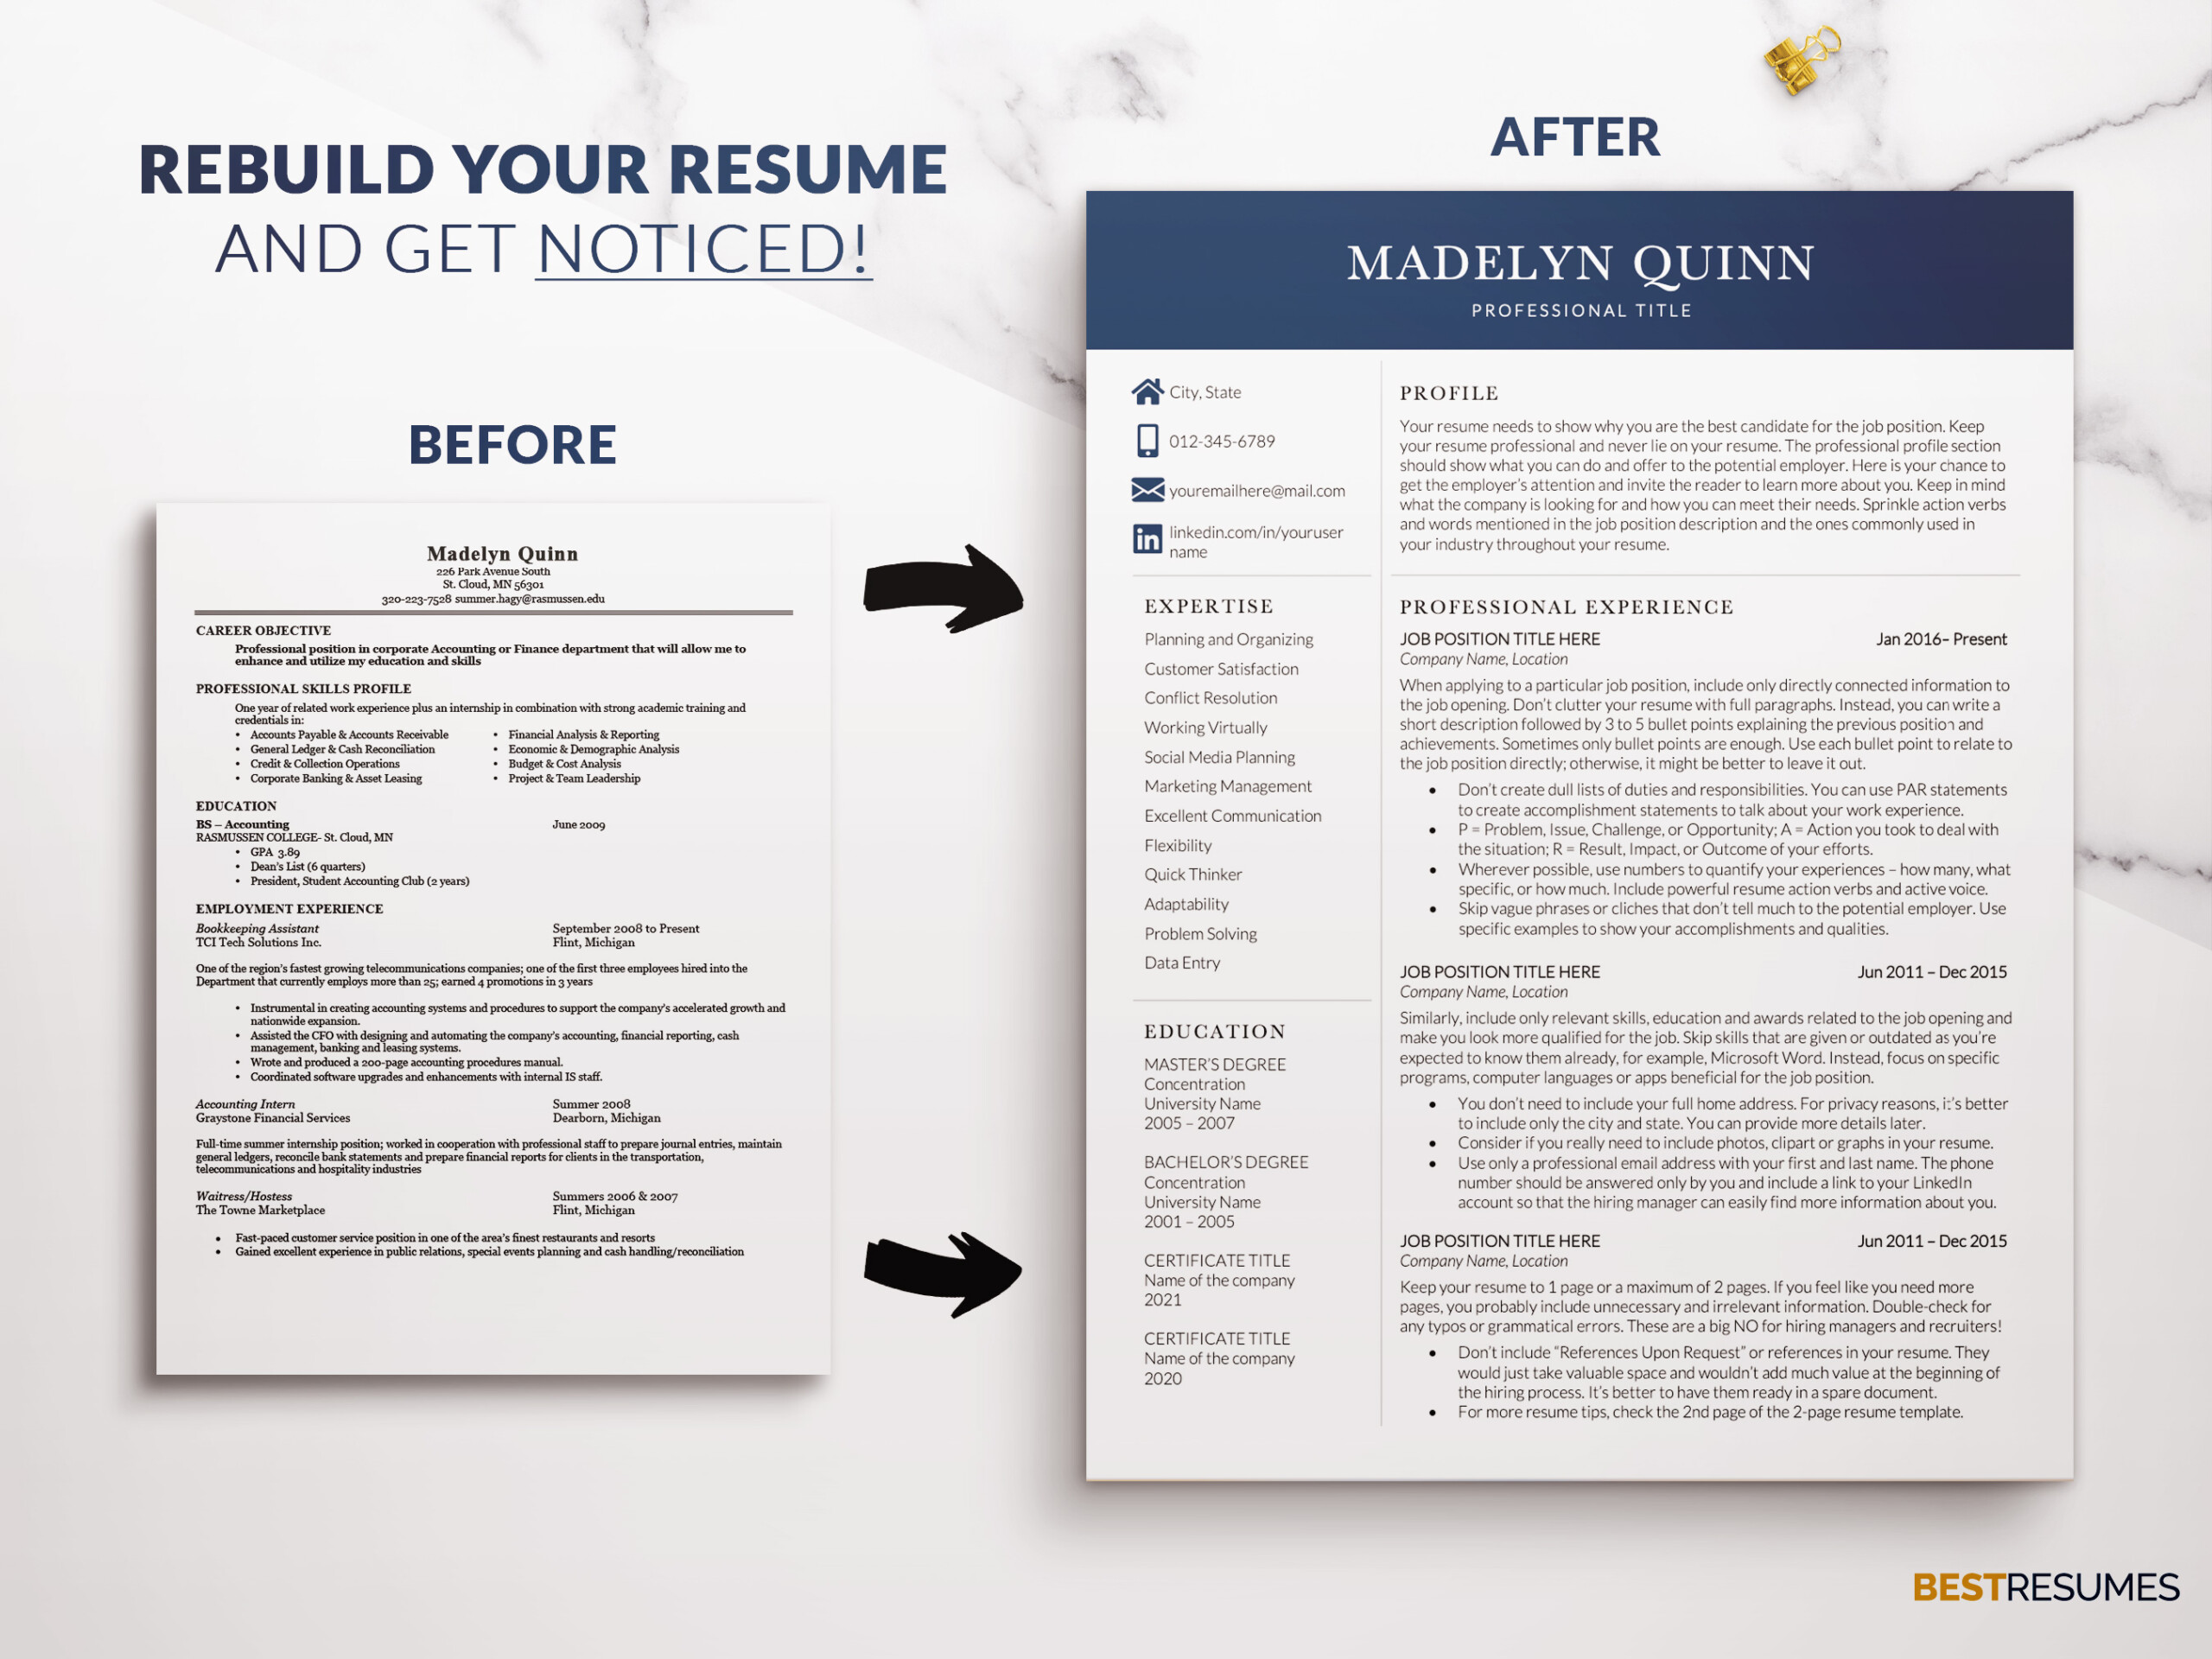 Modern Financial Resume Template Word Rebuild your Resume Madelyn Quinn